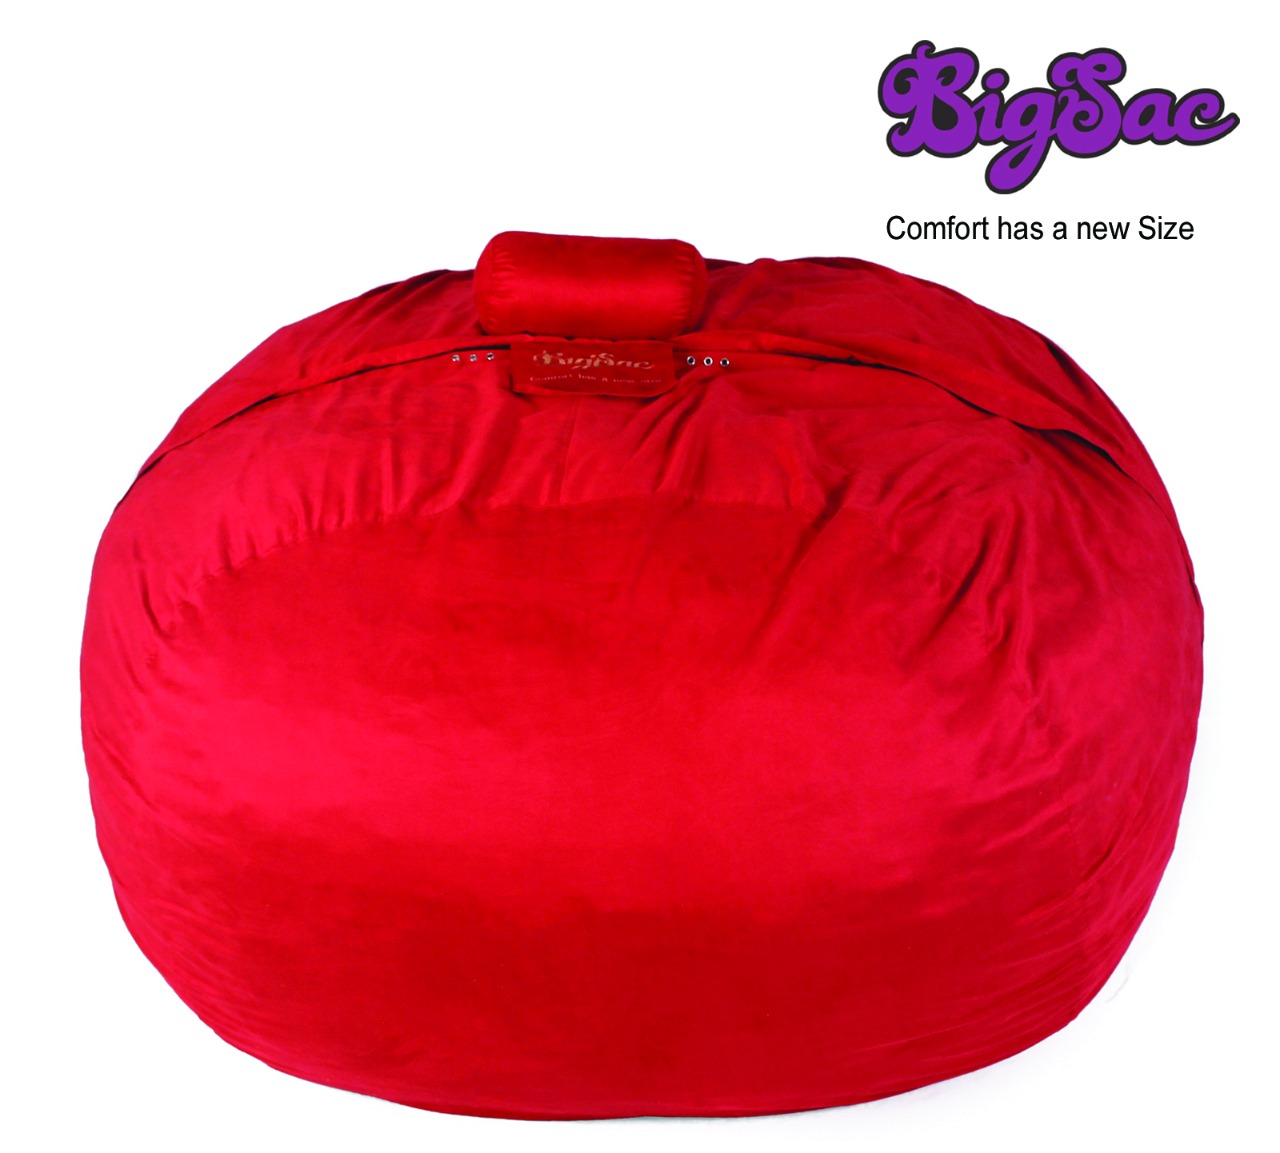 Big Sac 3.5 Feet Love Sac Premium Suede Fabric Filled Red Color - 5 Years Warranty        